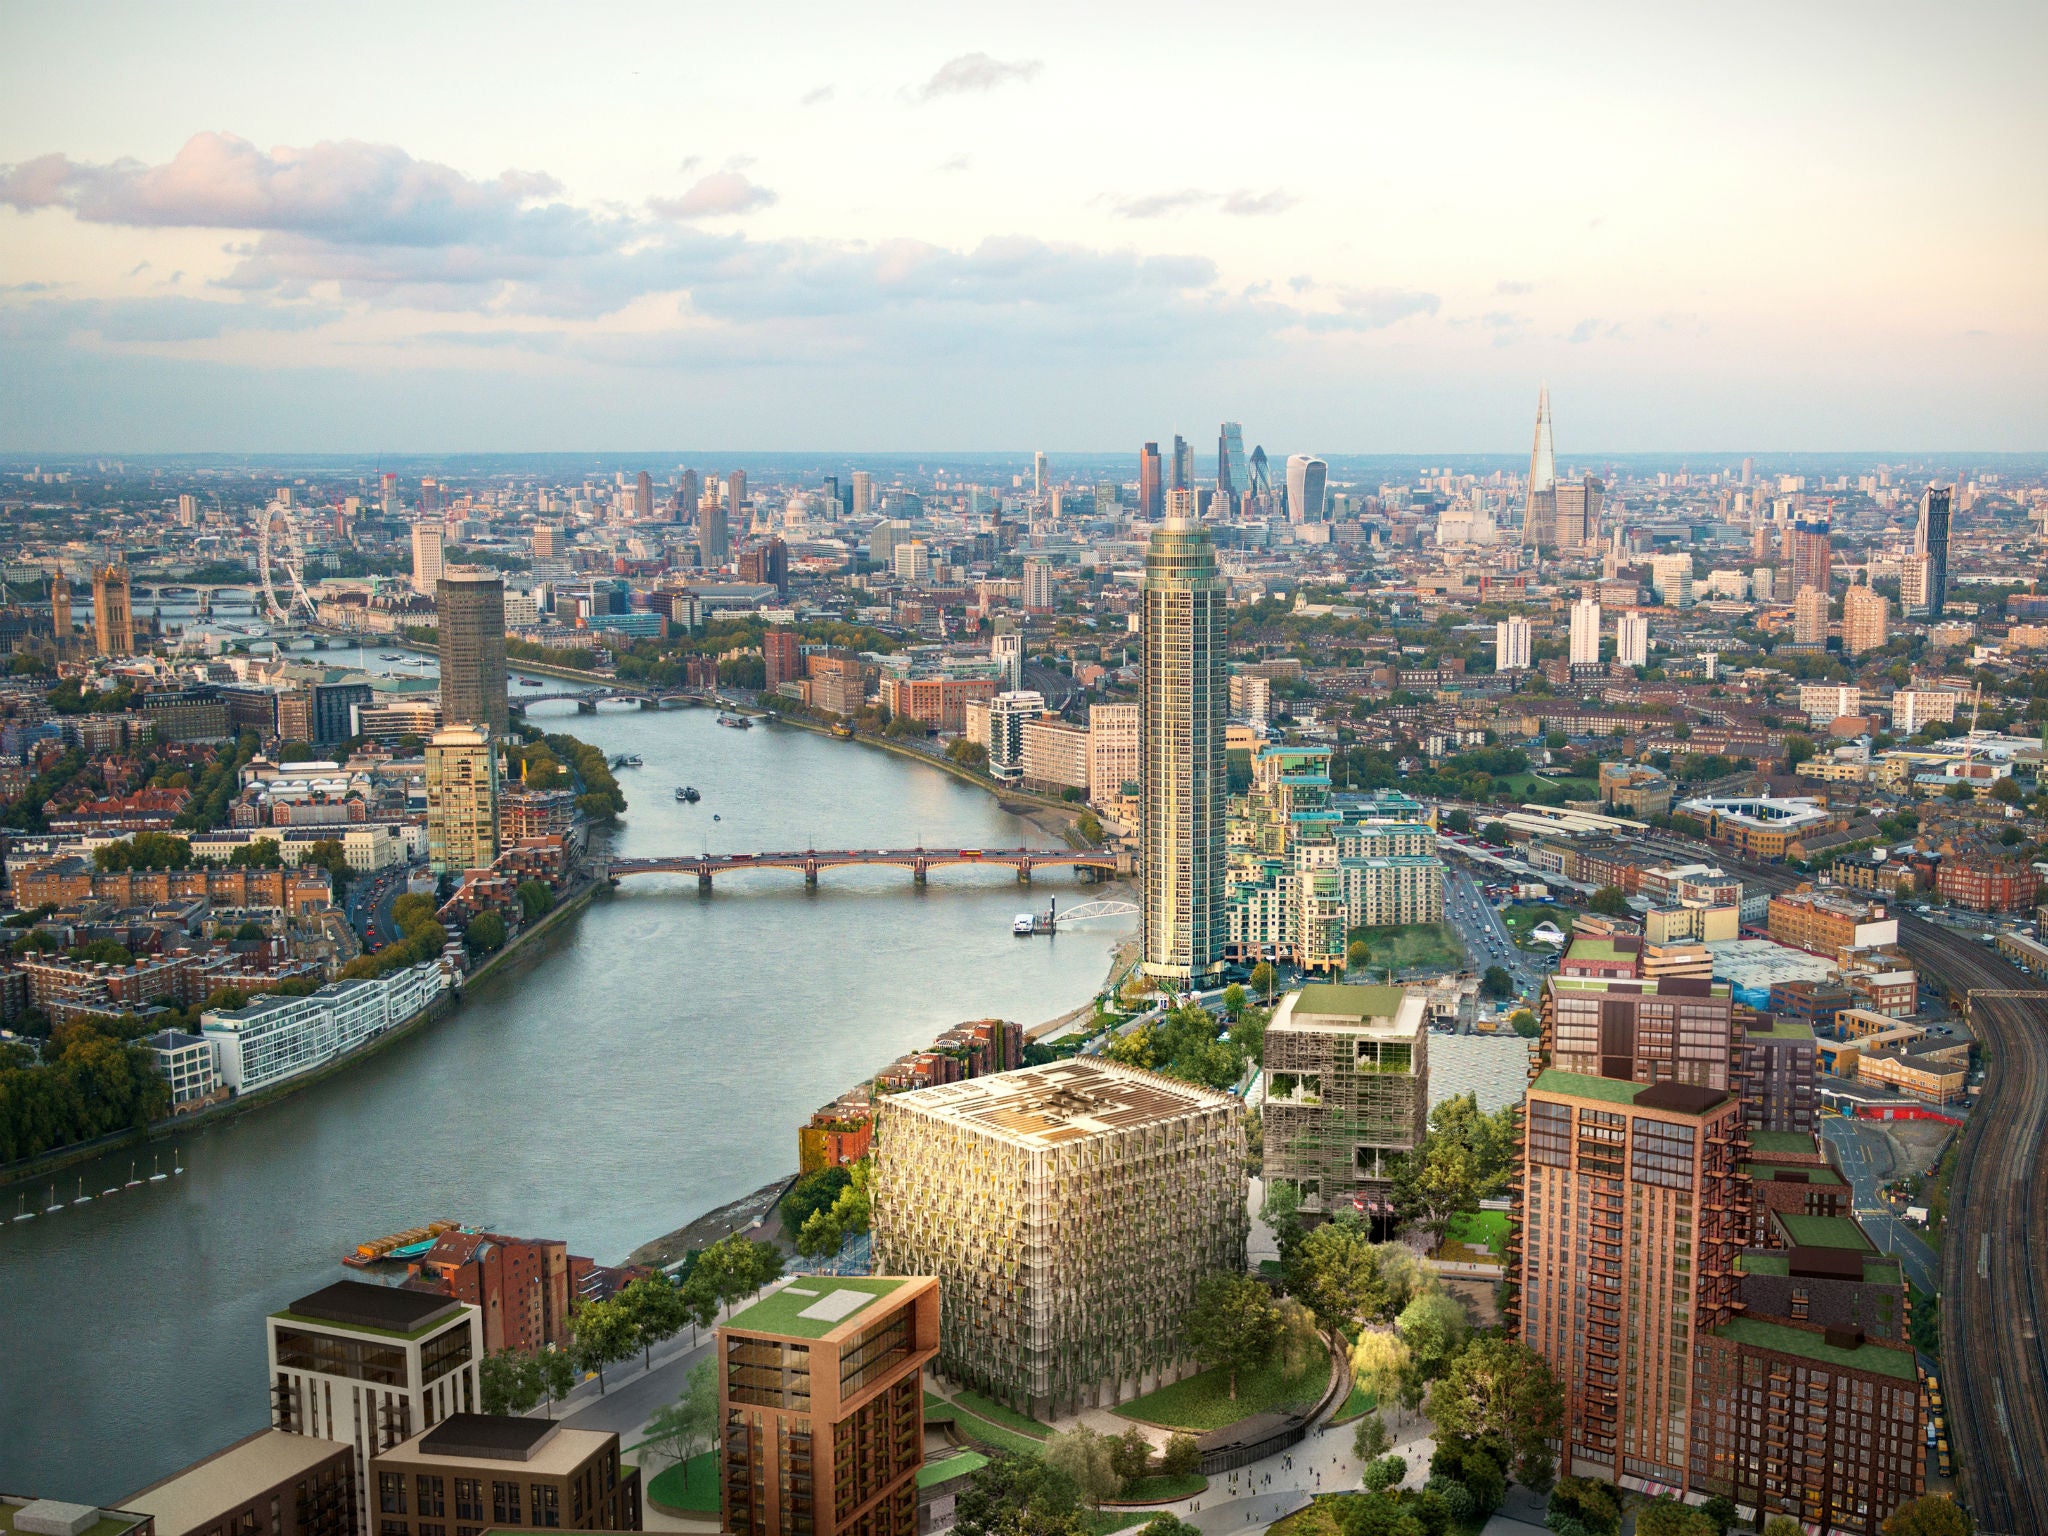 The aerial view of London from the Embassy Gardens, which will host a talk by the Sky Pool design team